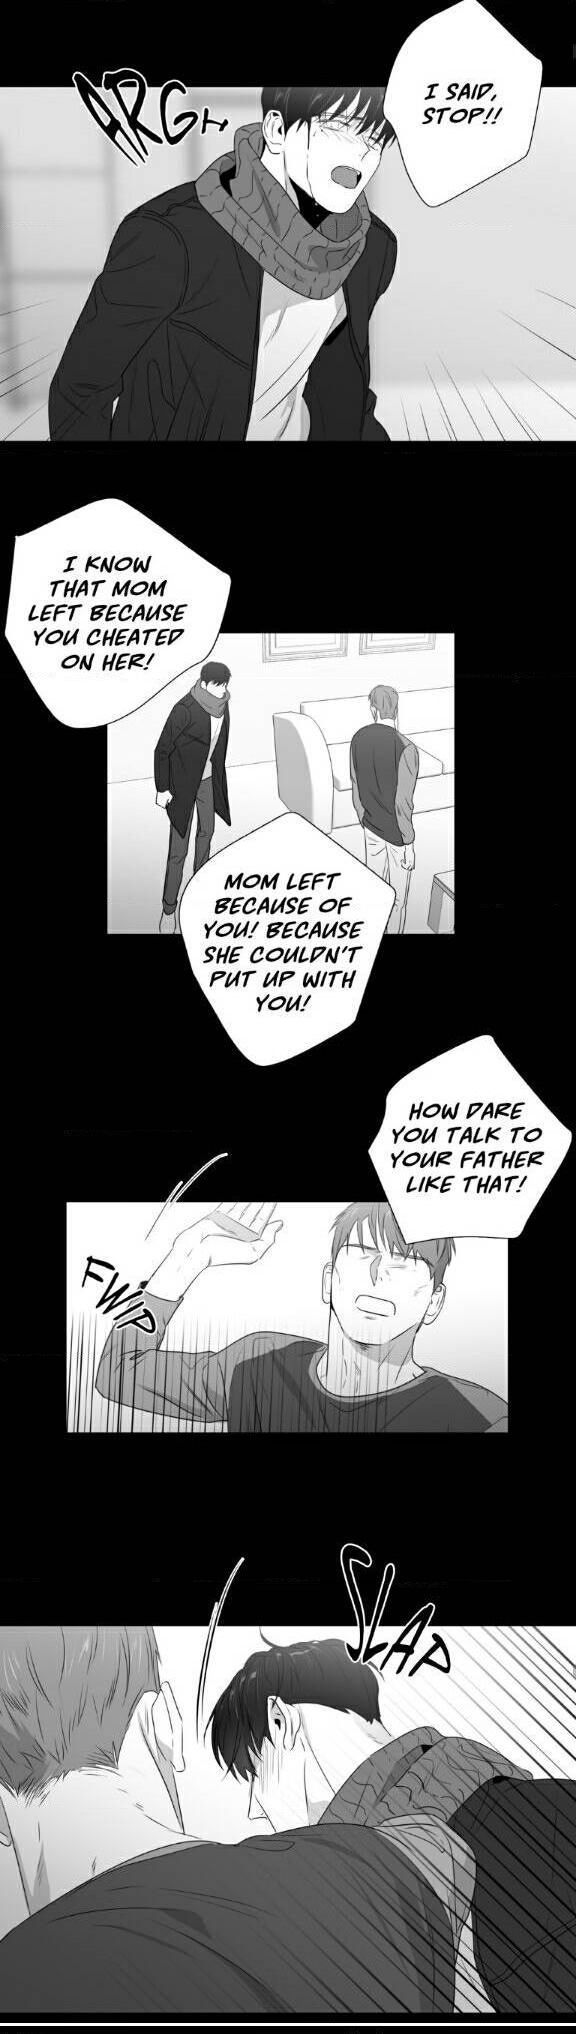 Lover Boy (Lezhin) Chapter 048.4 page 3